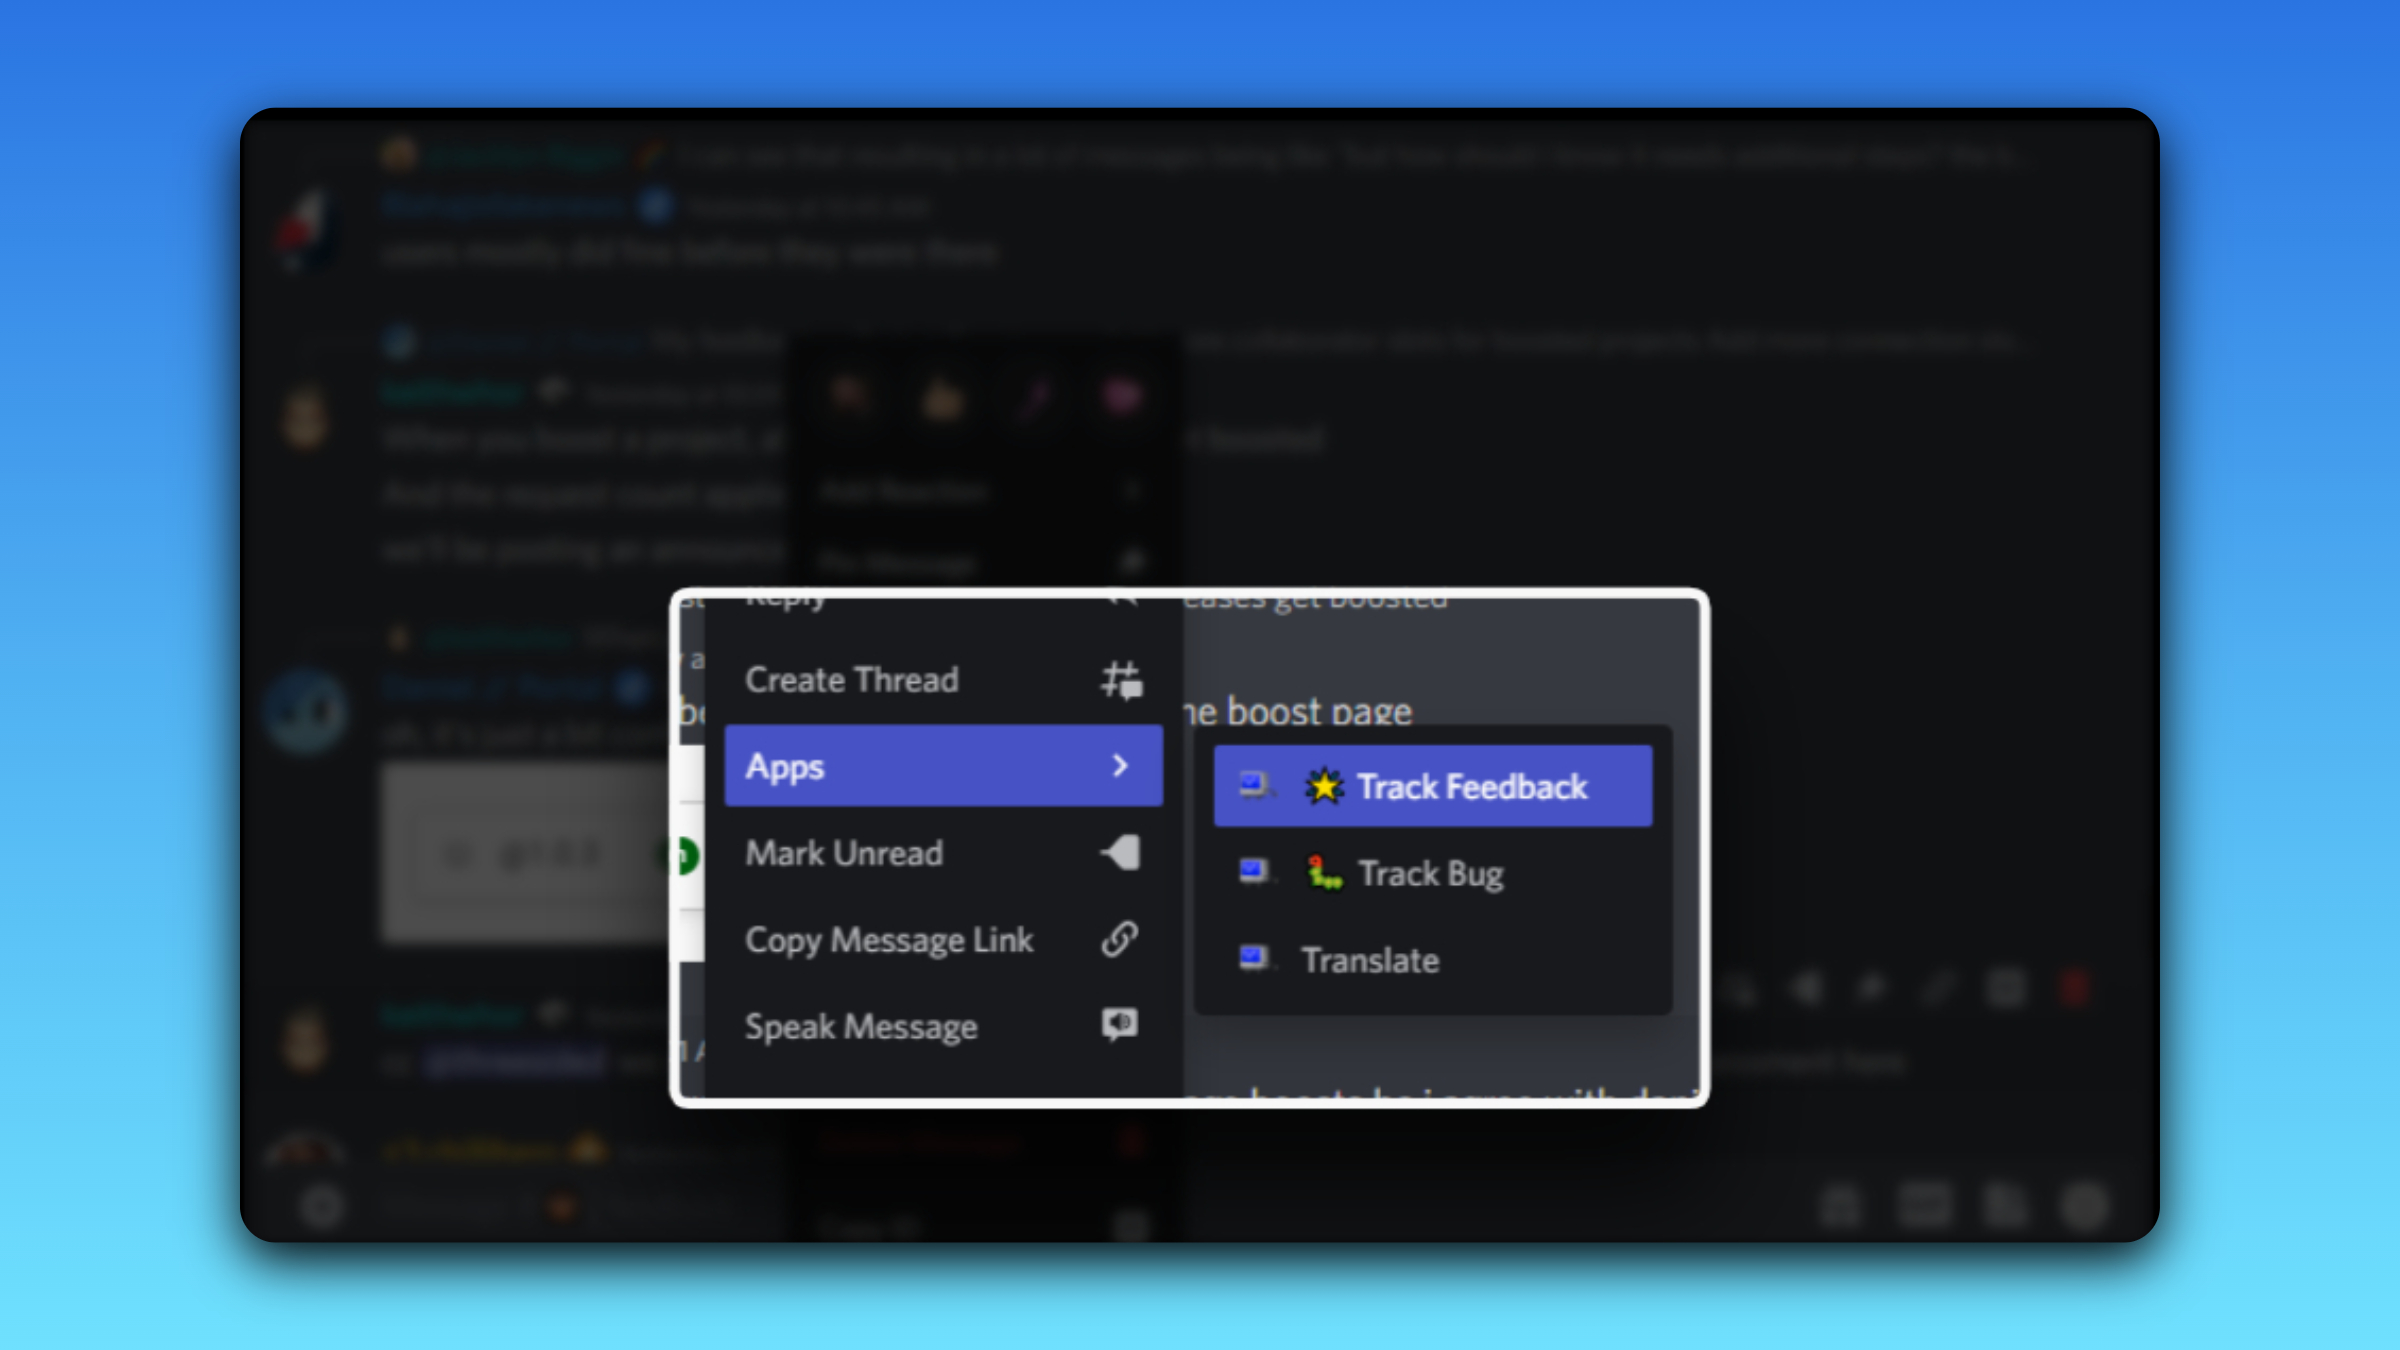 Autocode's Discord showing the context menu being used to track feedback of a message.